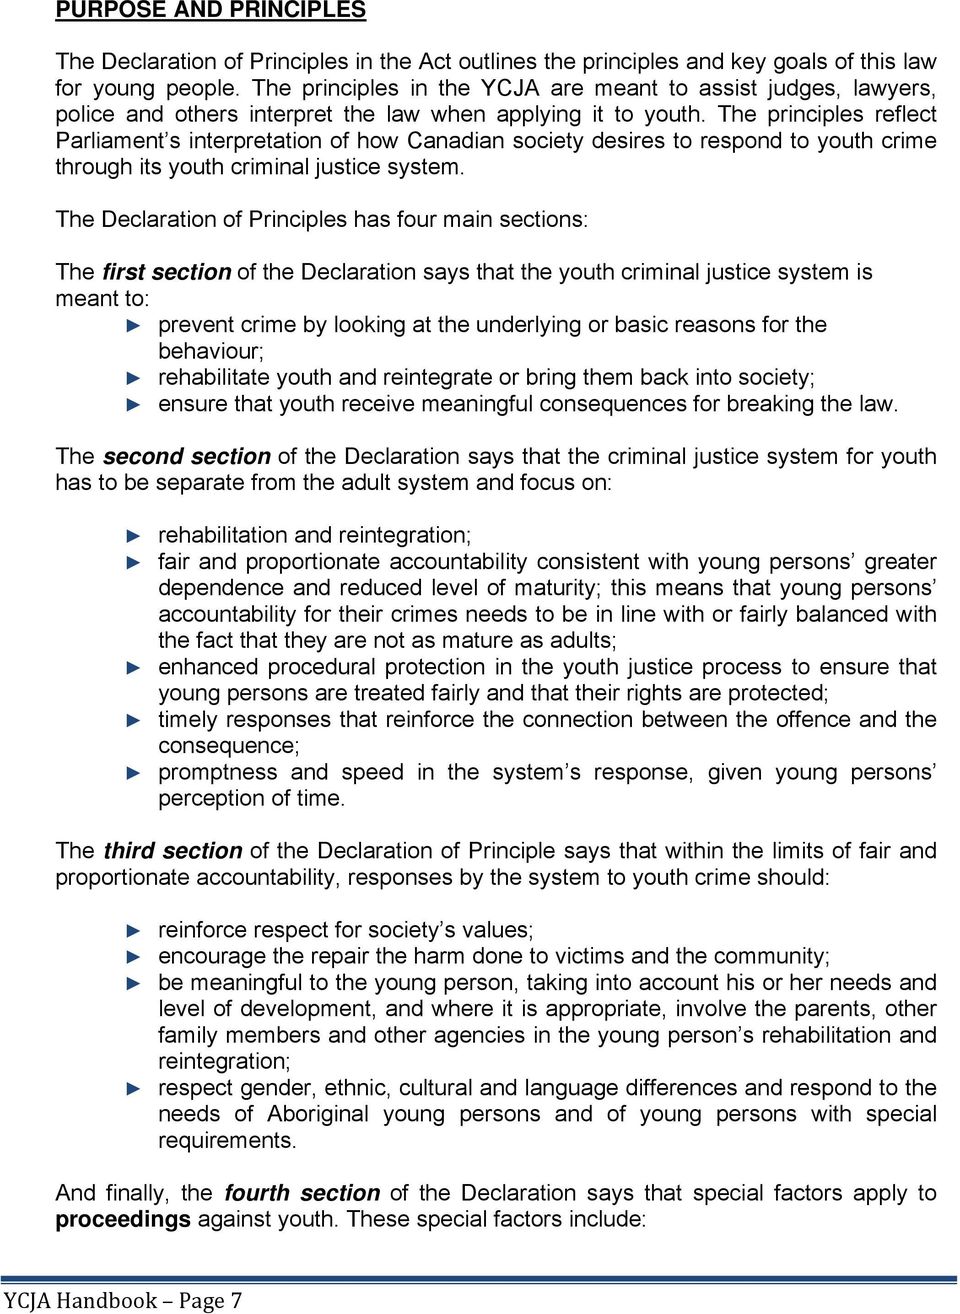 The principles reflect Parliament s interpretation of how Canadian society desires to respond to youth crime through its youth criminal justice system.